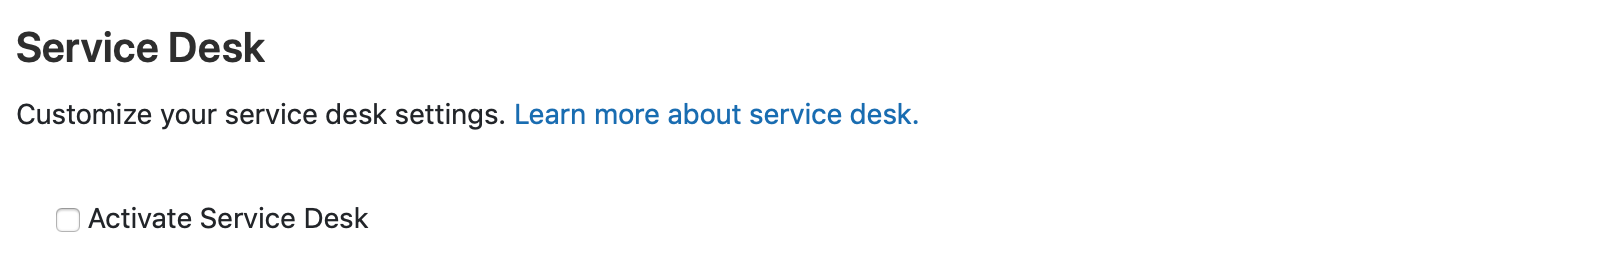 doc/user/project/img/service_desk_disabled.png